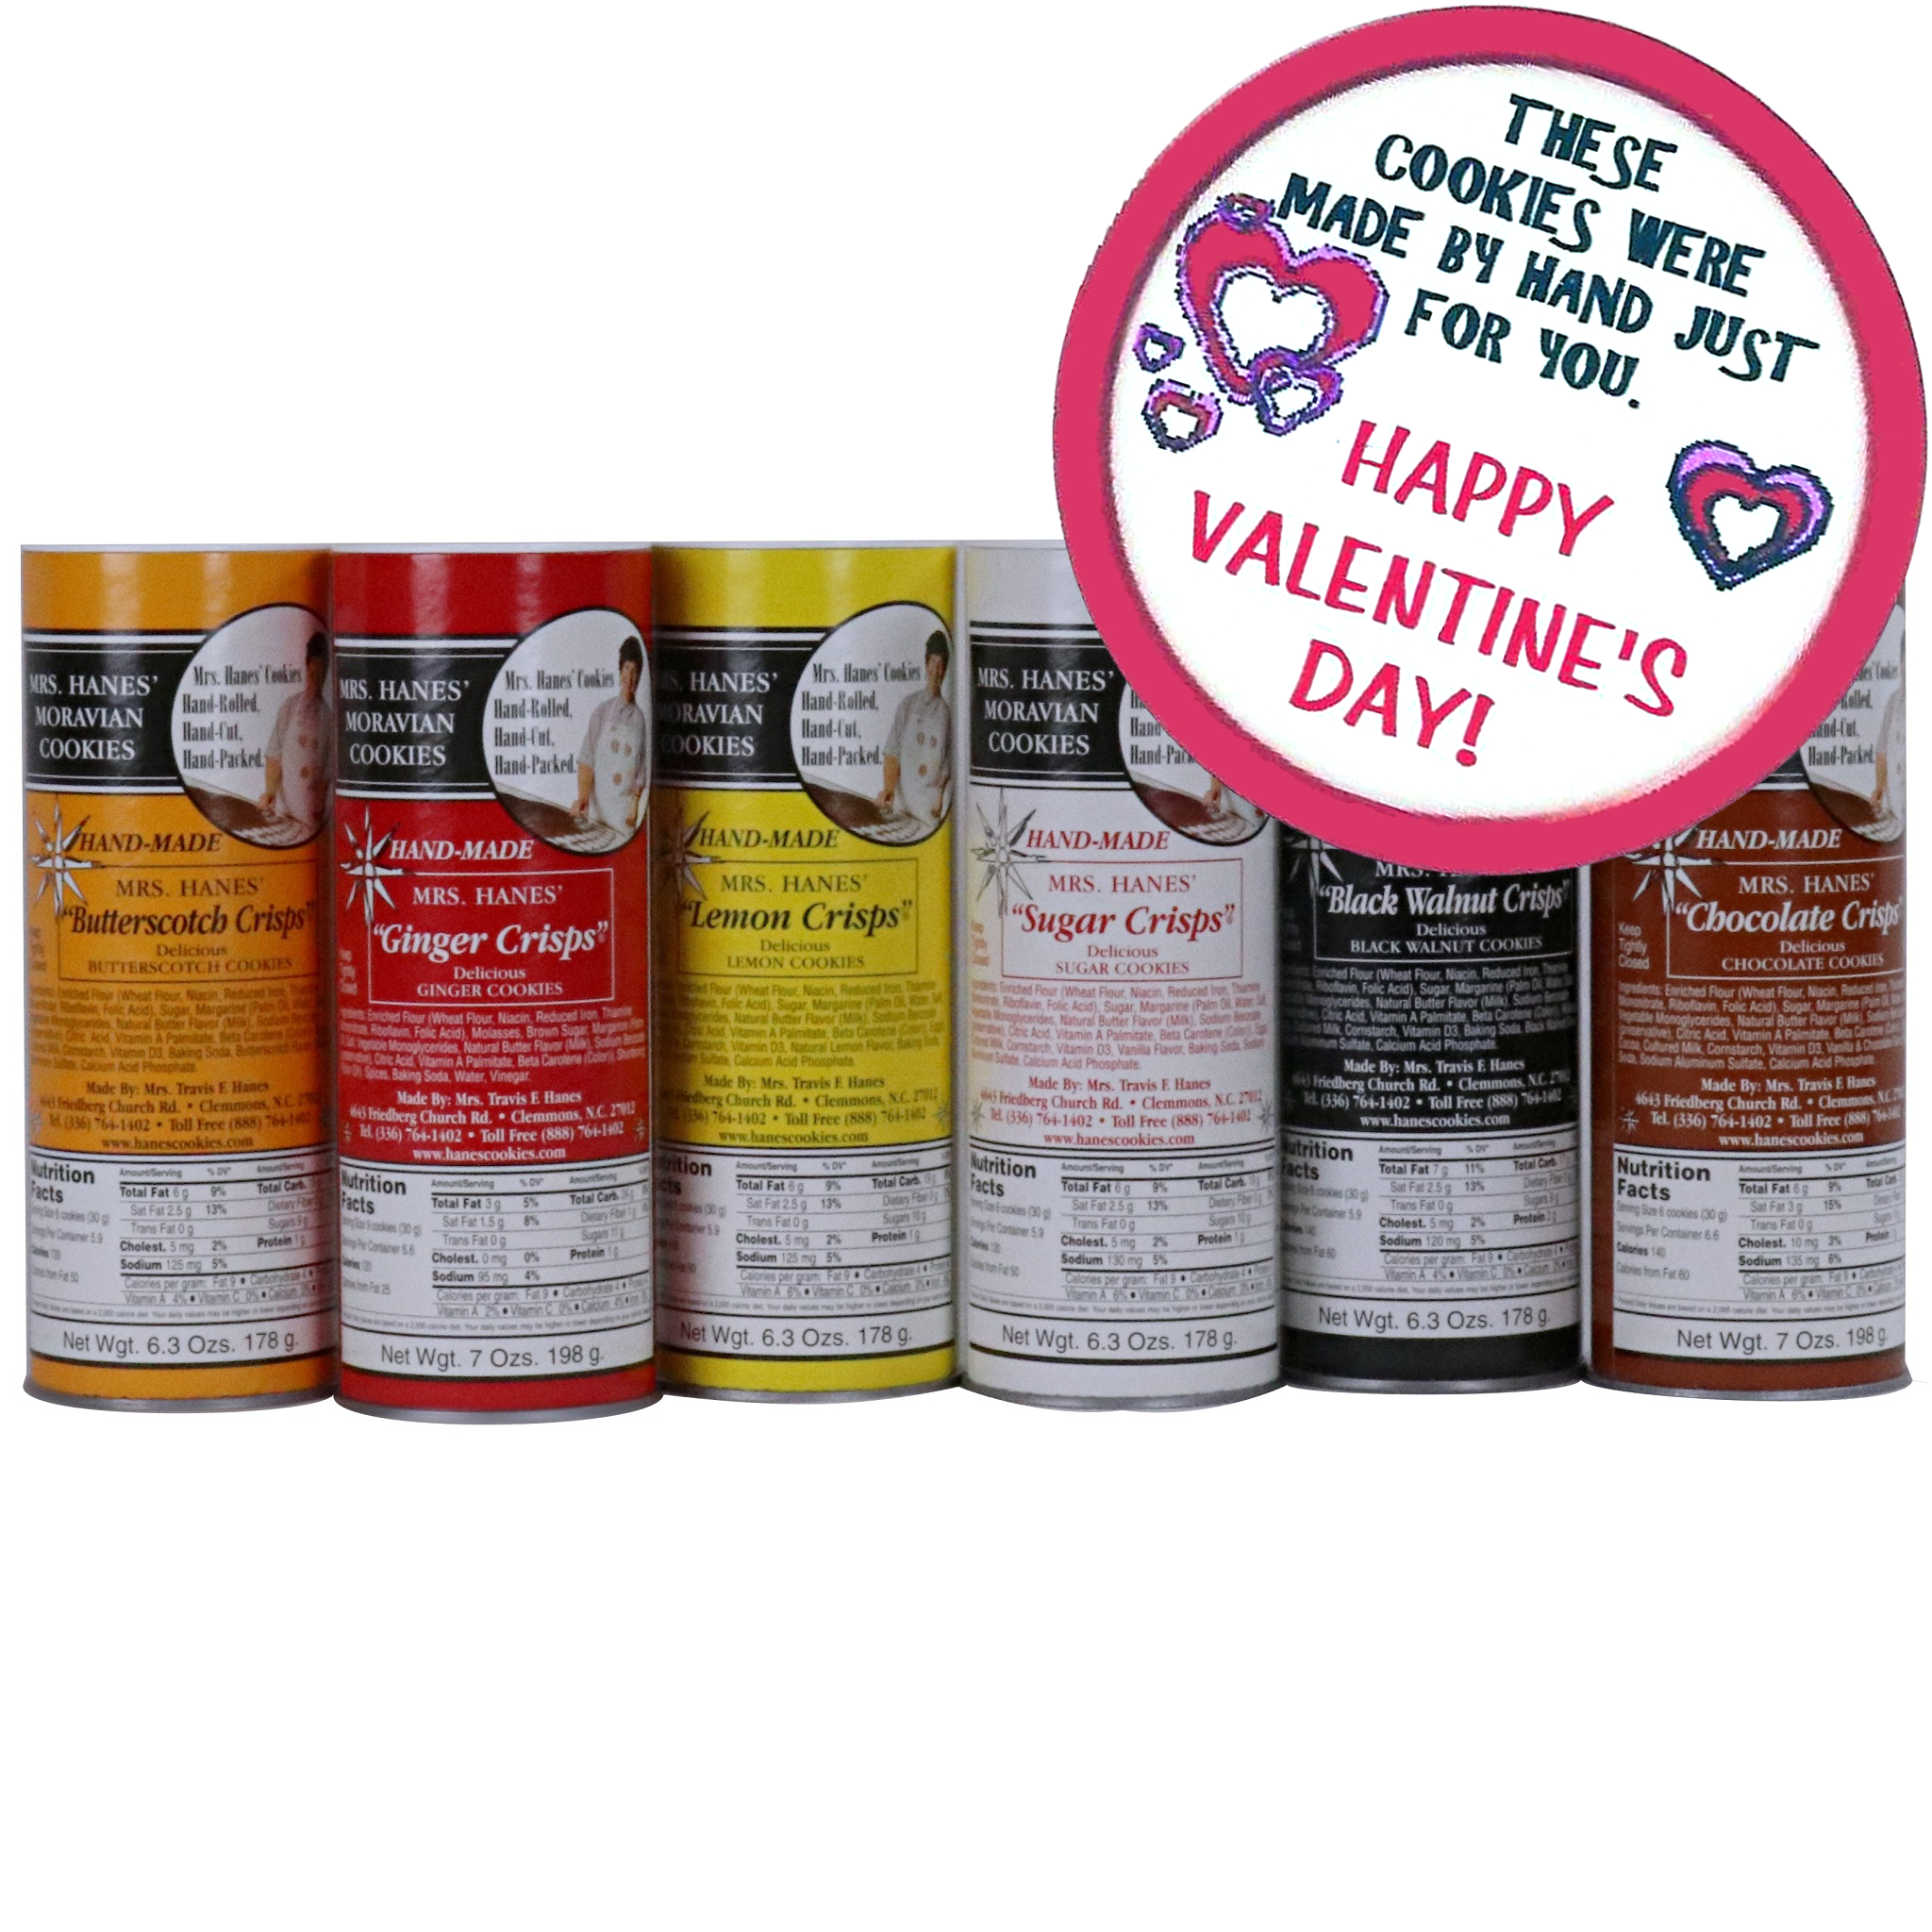 Six Tubes of Moravian Cookies (one of each flavor) with Valentine Labels